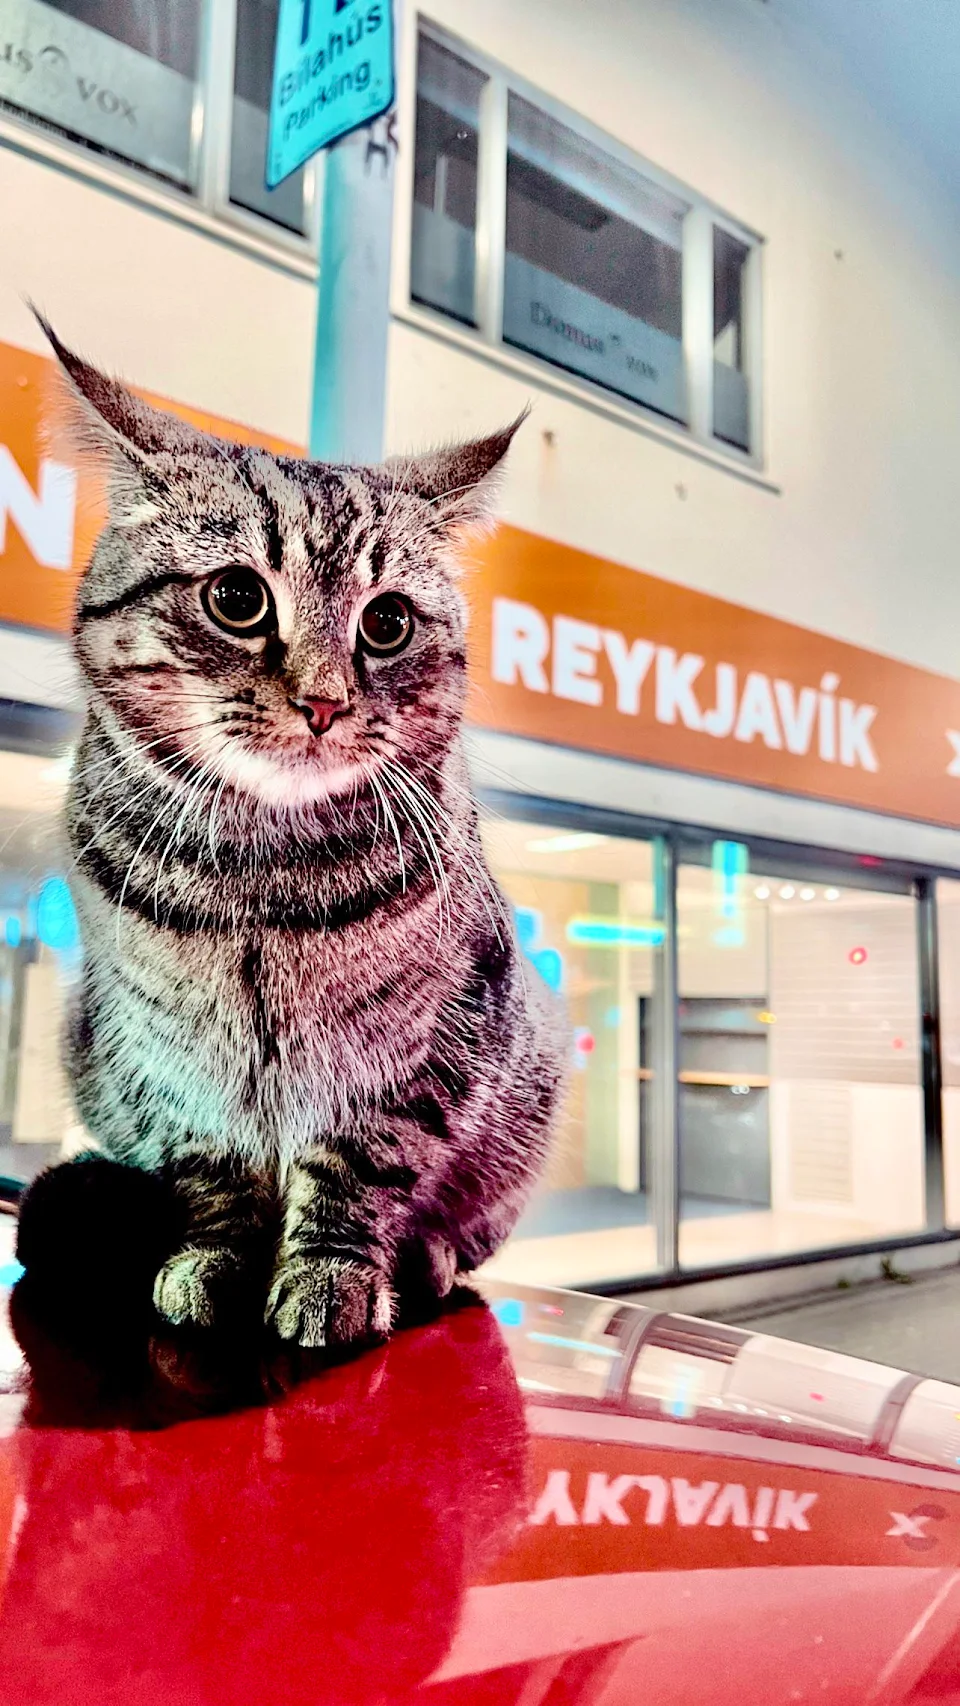 (OC) Cat on Car. This friendly cat followed me and my gf for a ways in Reykjavik city center. She kept getting in front or on higher ground to receive pets.